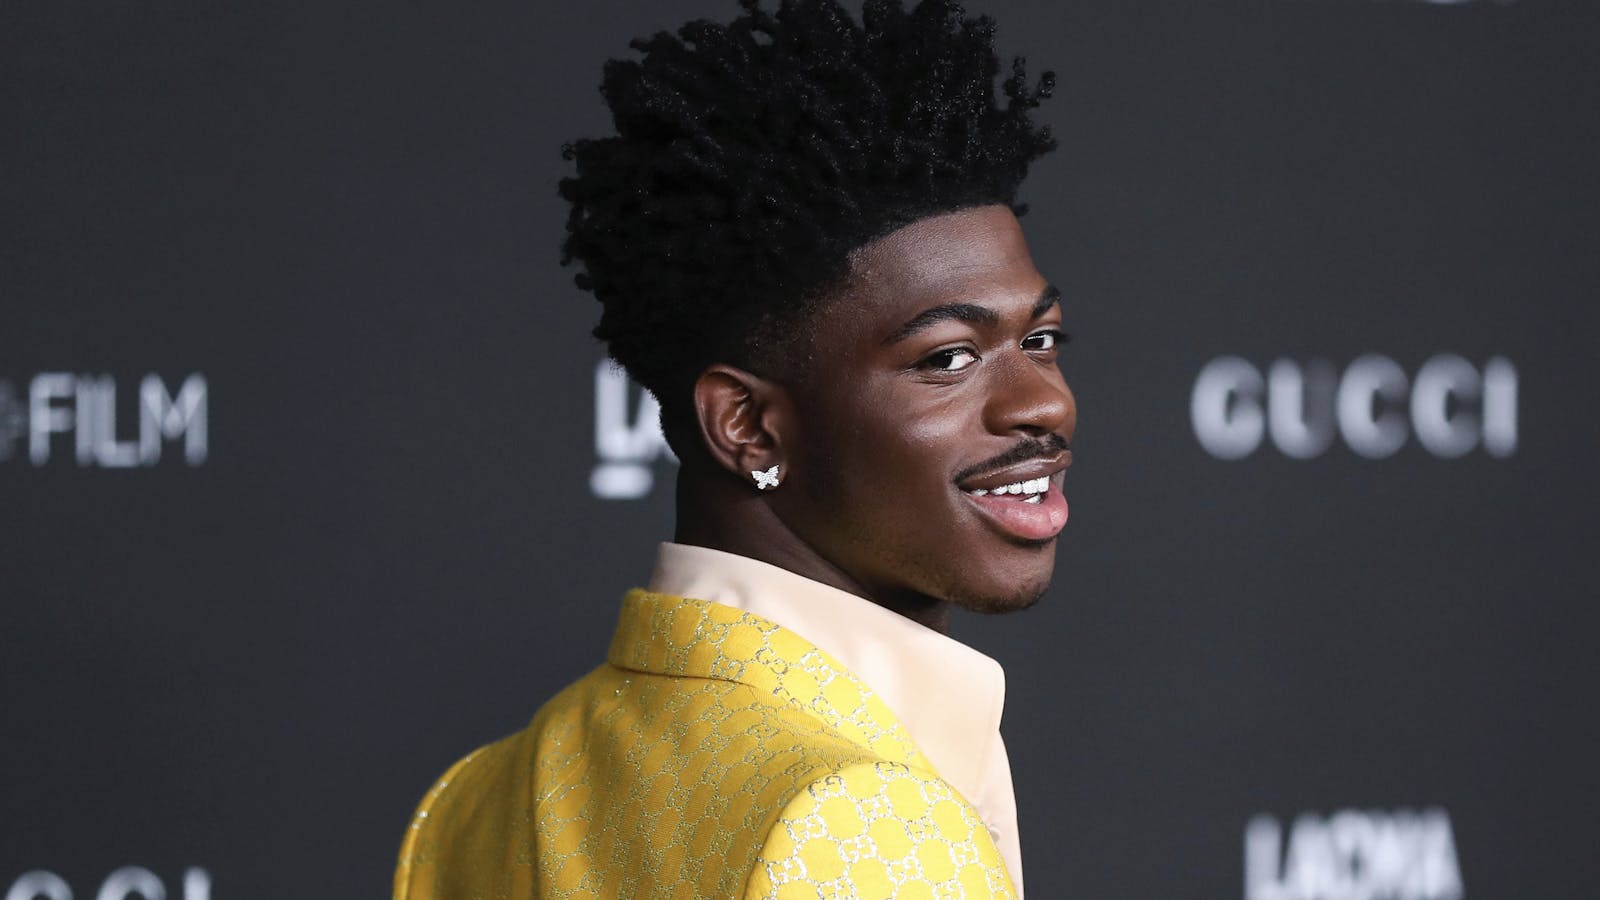 Rapper Lil Nas X, whose career got a lift from TikTok. Photo by AP